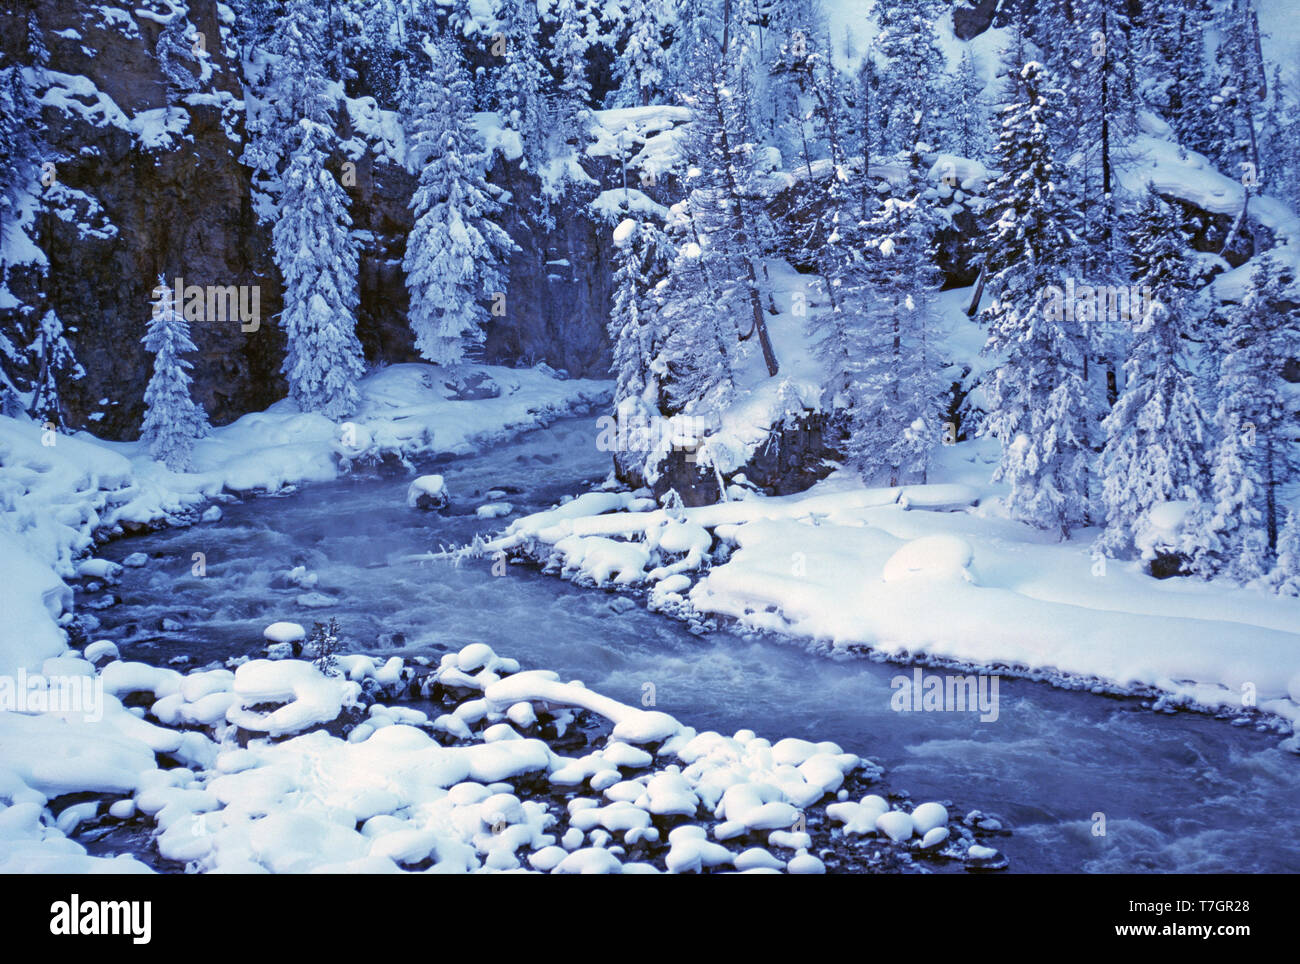 USA. Wyoming. Yellowstone National Park. Winter forest snow scene with stream. Stock Photo